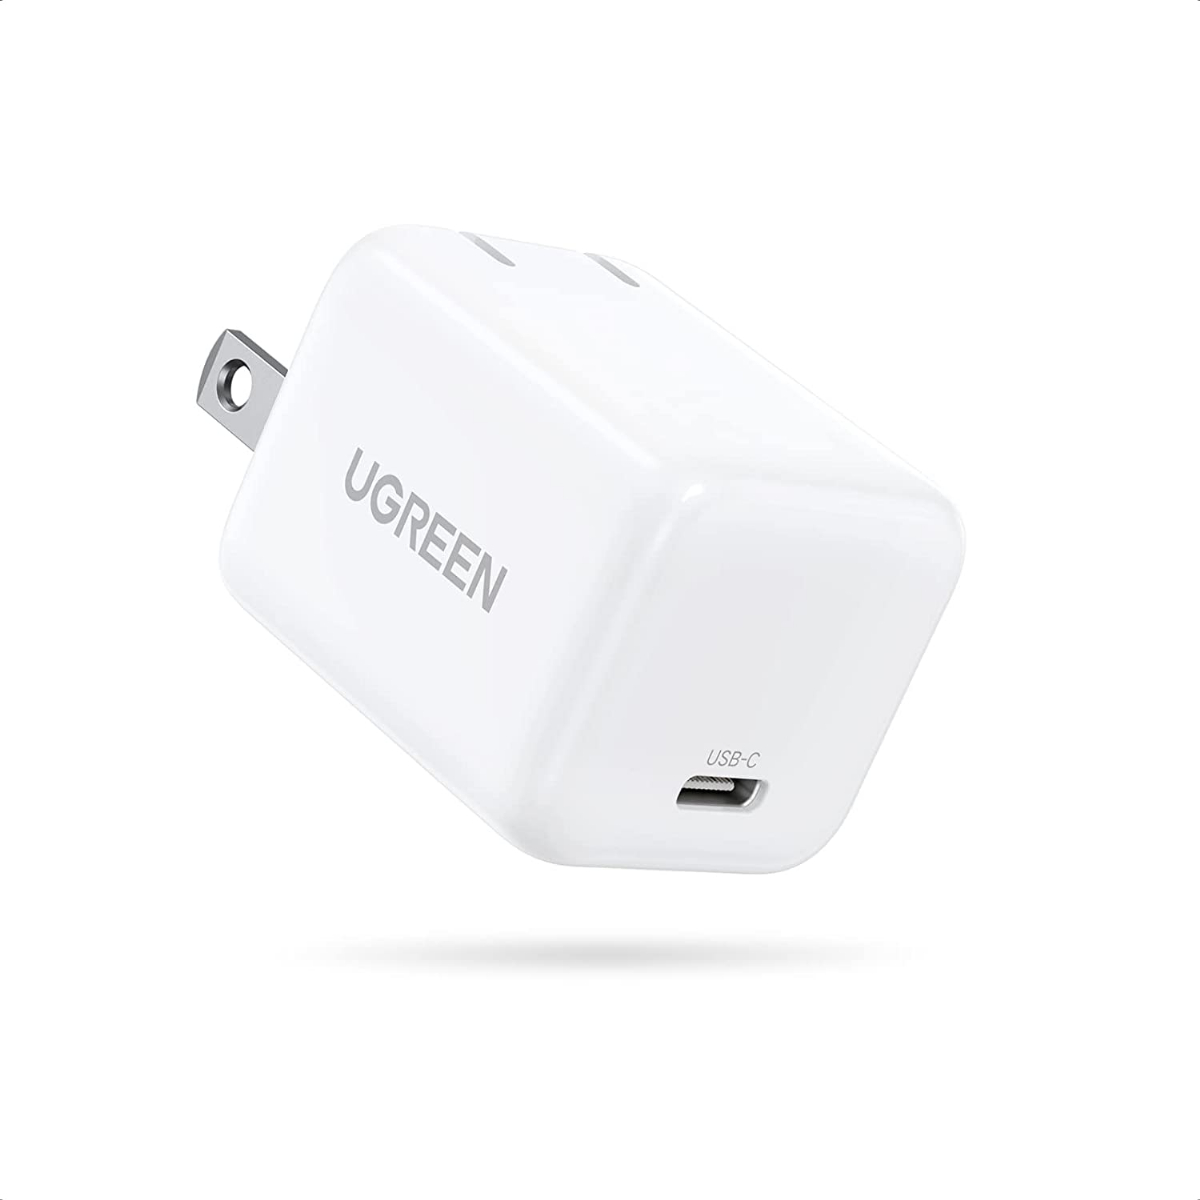 AirPods Deep Dream USB C Charger 65W 3 Port GaN Tech PD Wall Charger,Fast Charging Block Type C Power Adapter for Laptop MacBook Pro Air Tablets iPhone 13 12 Pro Max Galaxy S20 -White 